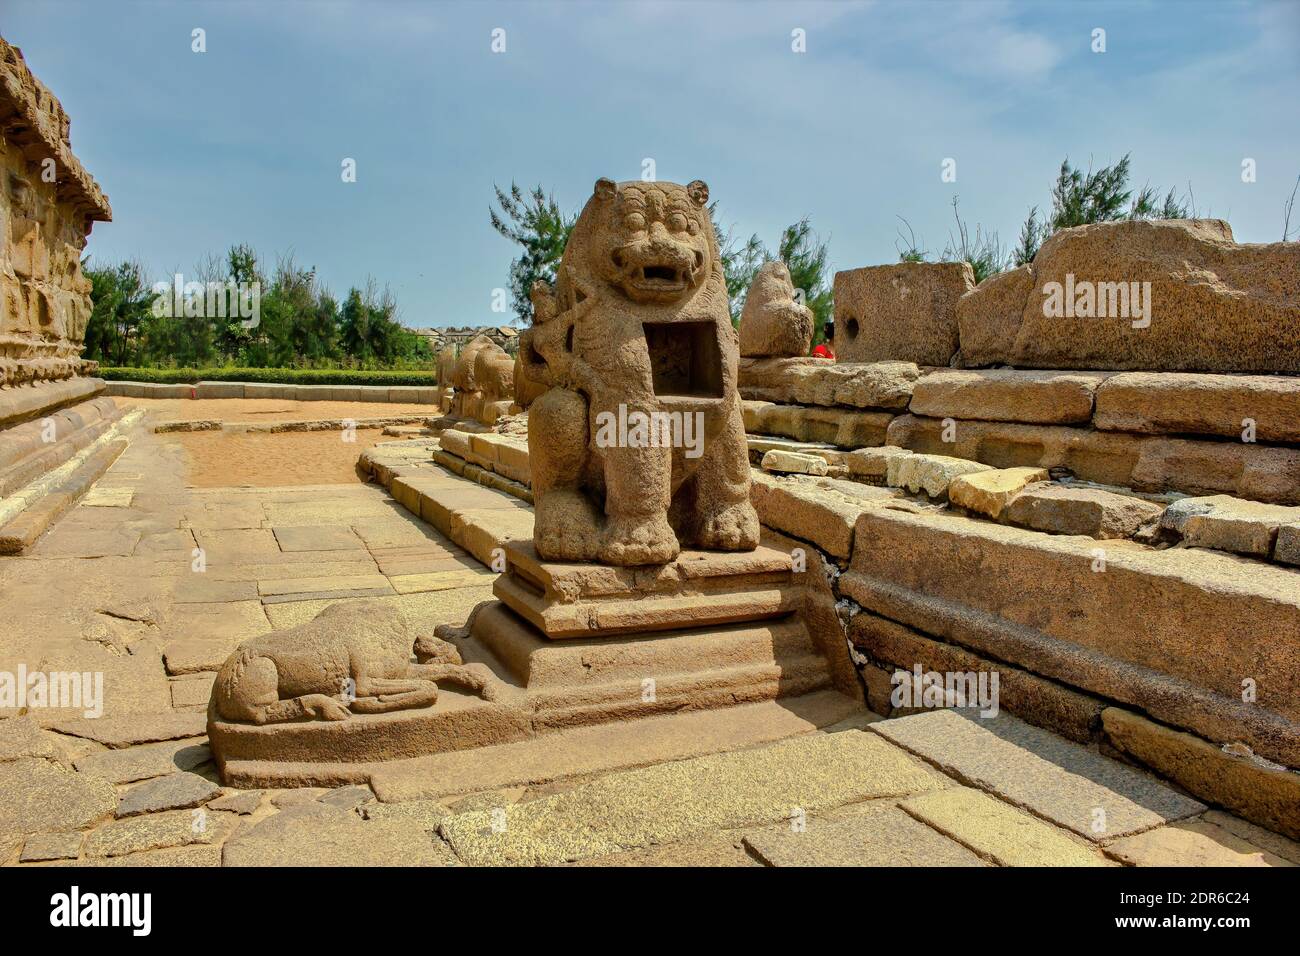 Chennai, South India - October 28, 2018: Lion monolith stone sculpture built inside Mahabalipuram in the state of Tamil nadu Stock Photo